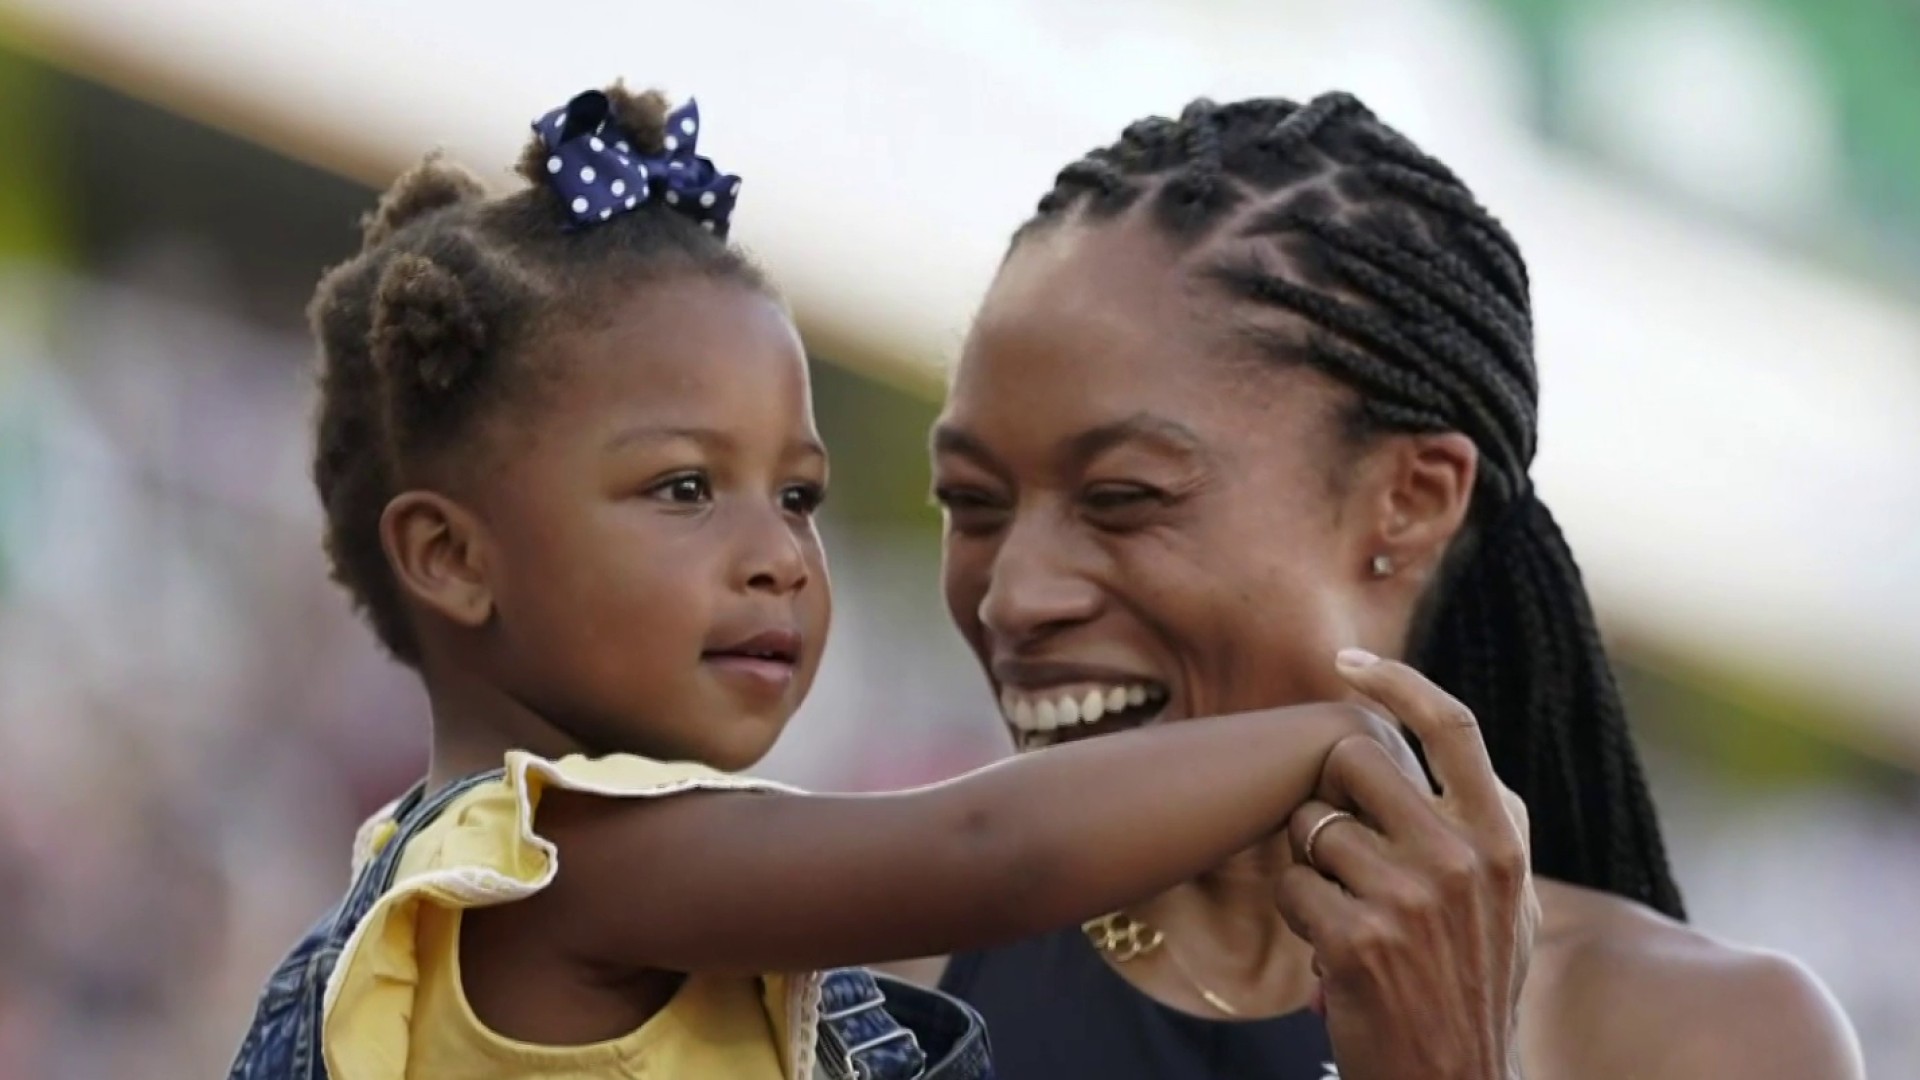 Allyson Felix Becomes the Most Decorated U.S. Olympic Track